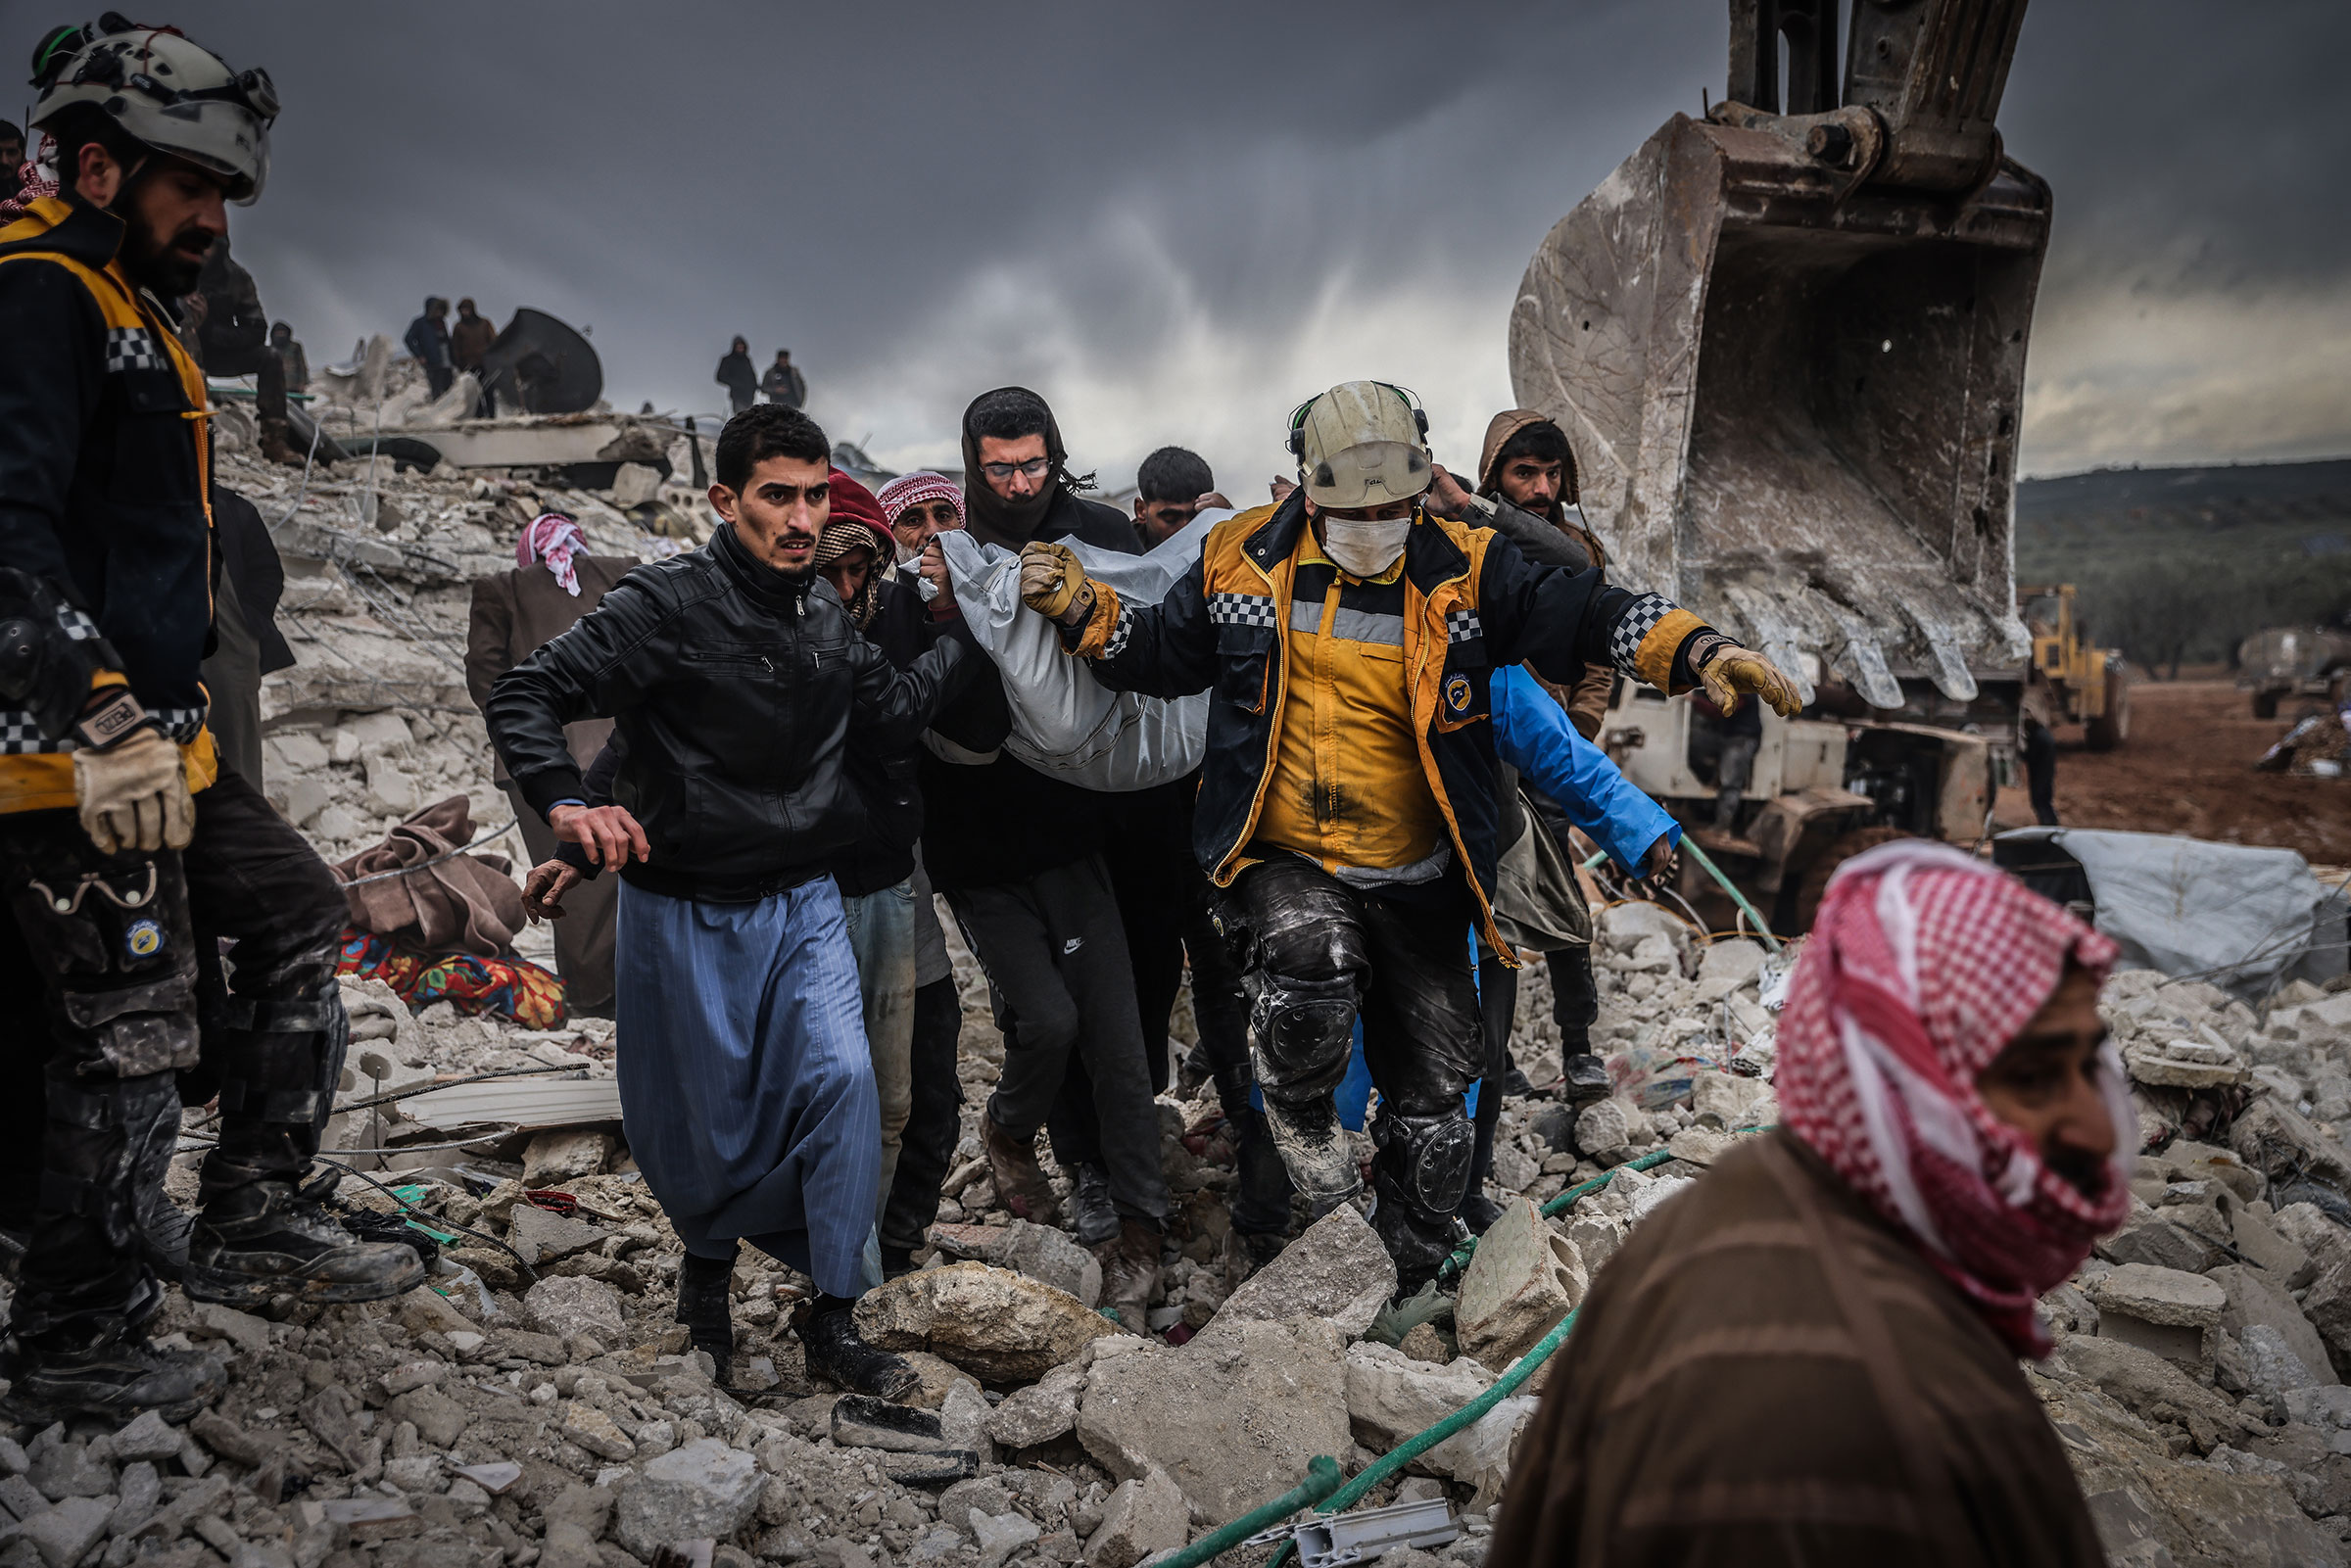 Syrian civilians and members of the White Helmets conduct search and rescue operations in the rubble of a collapsed building in Syria. (Anas Alkharboutli—picture alliance/Getty Images)